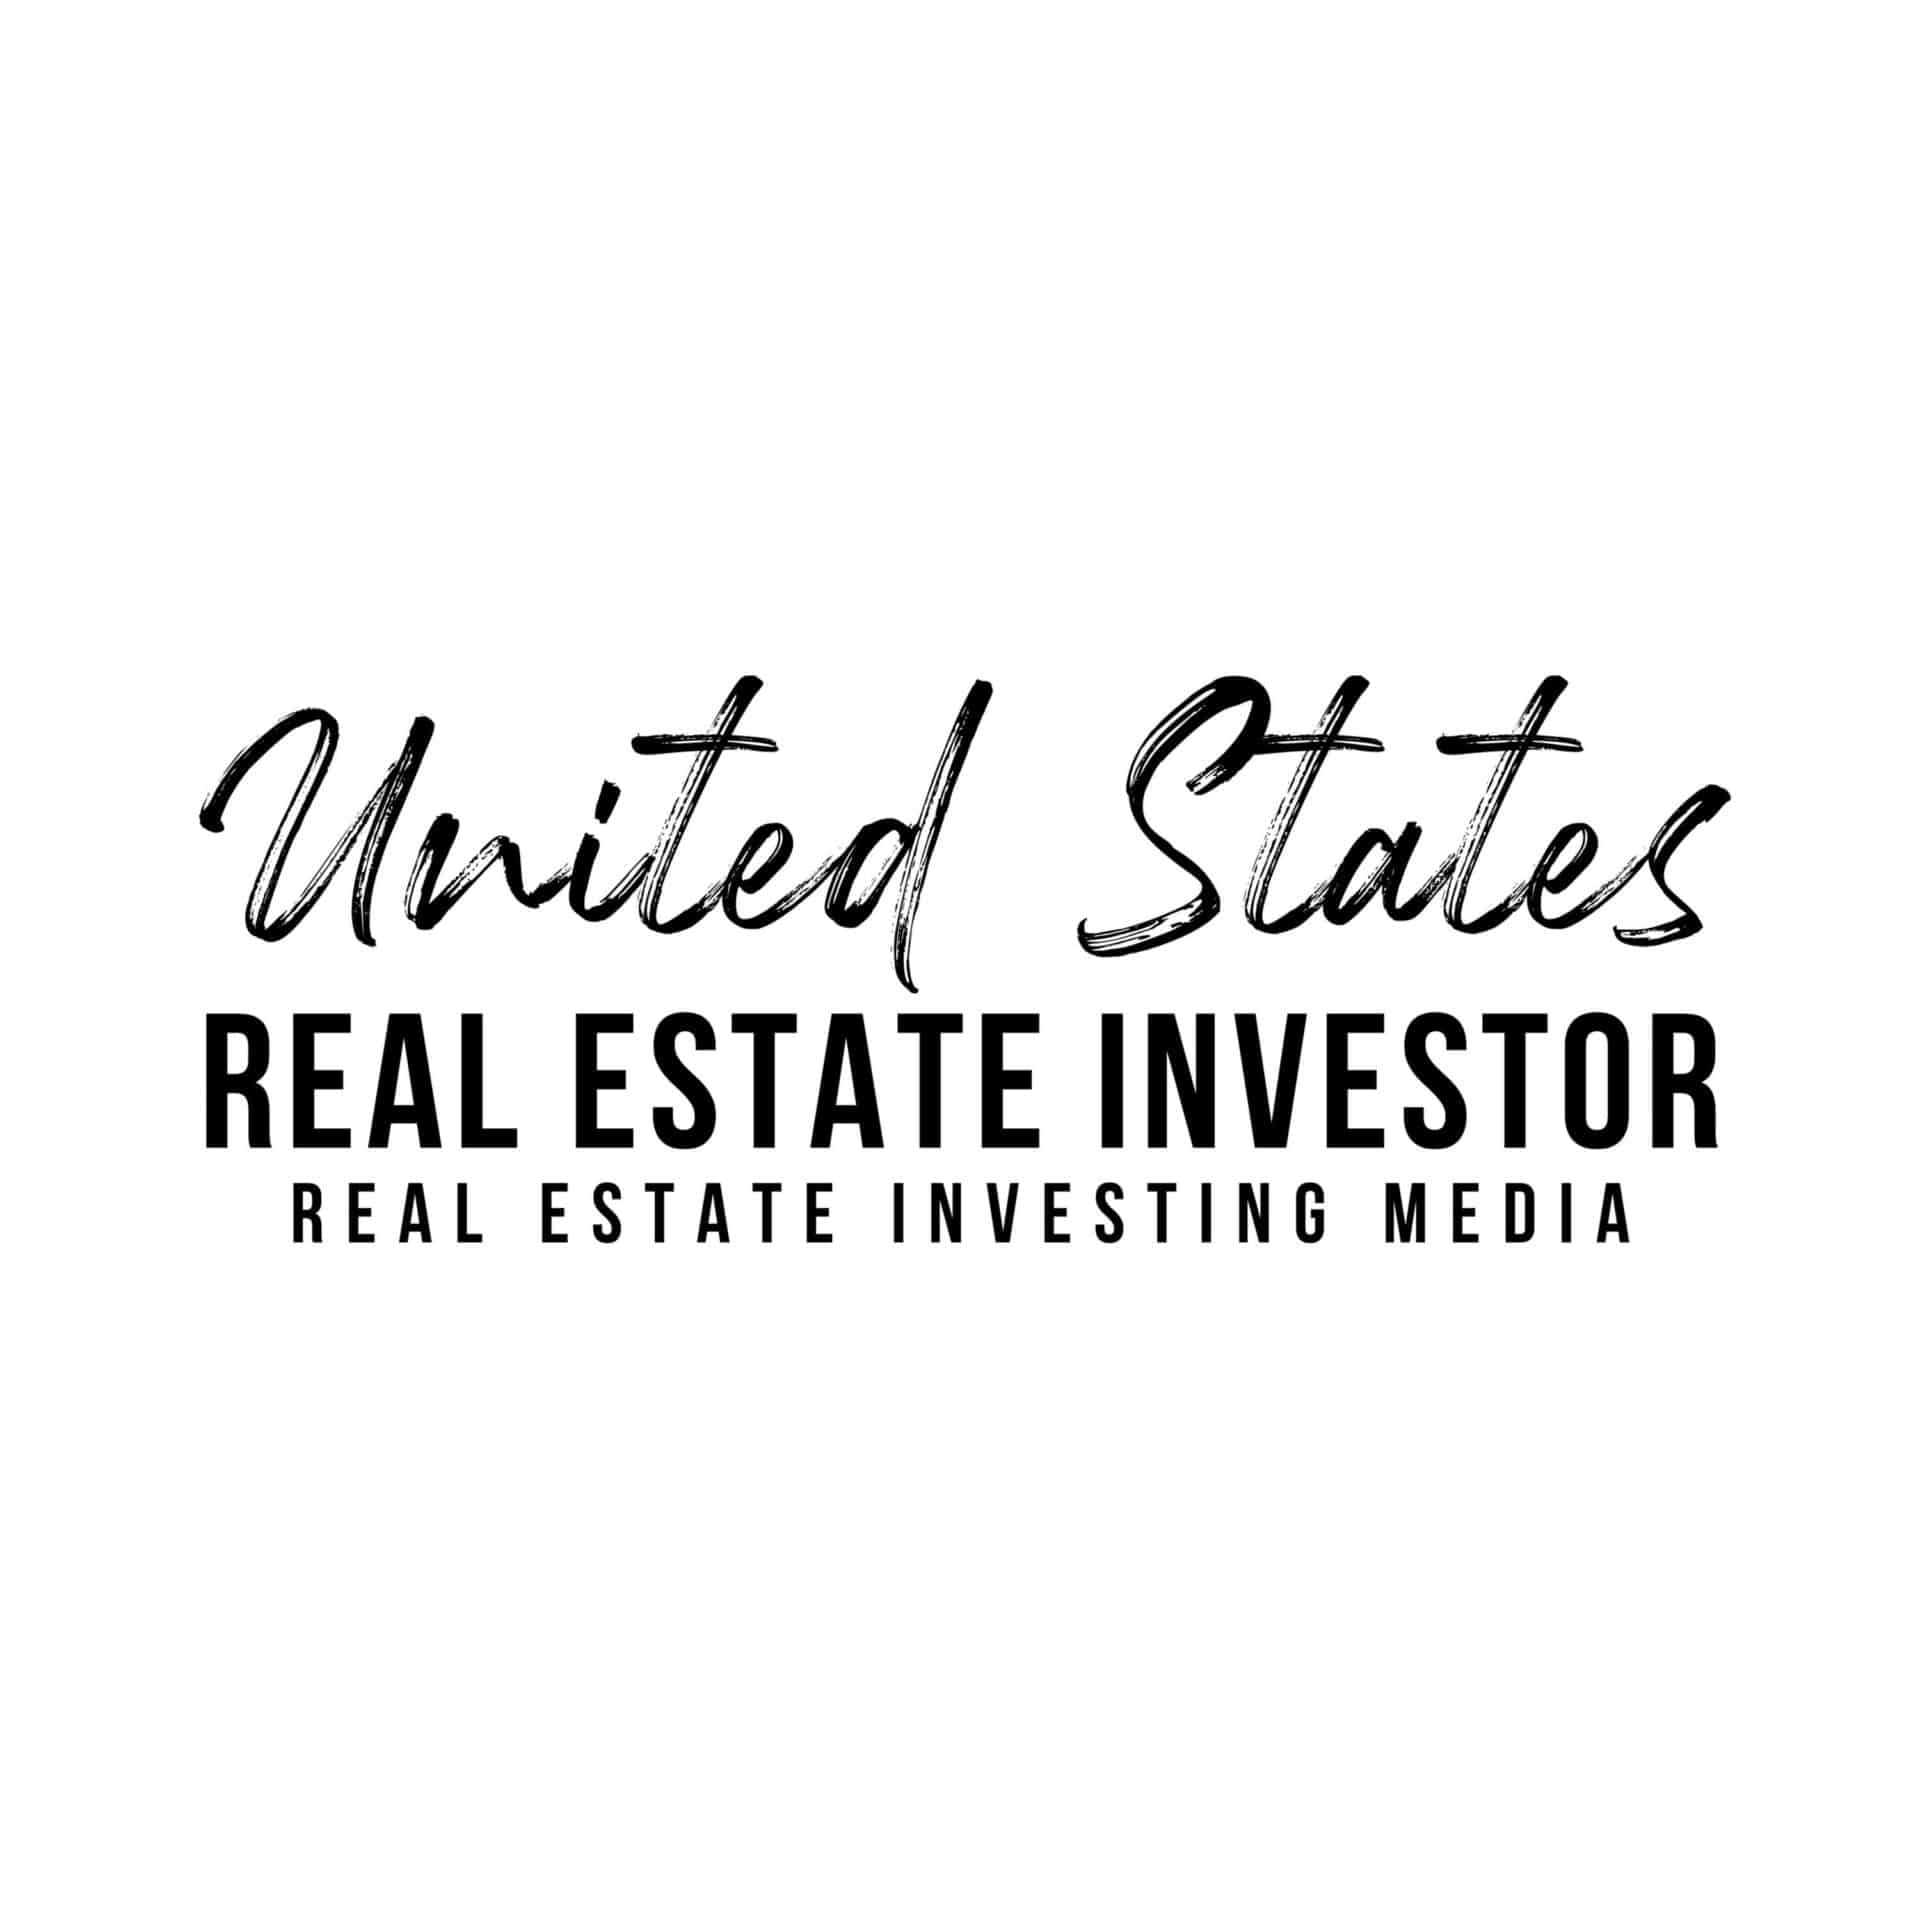 Podcast Feeds - Subscribe, Rate, and Review United States Real Estate Investor Podcasts